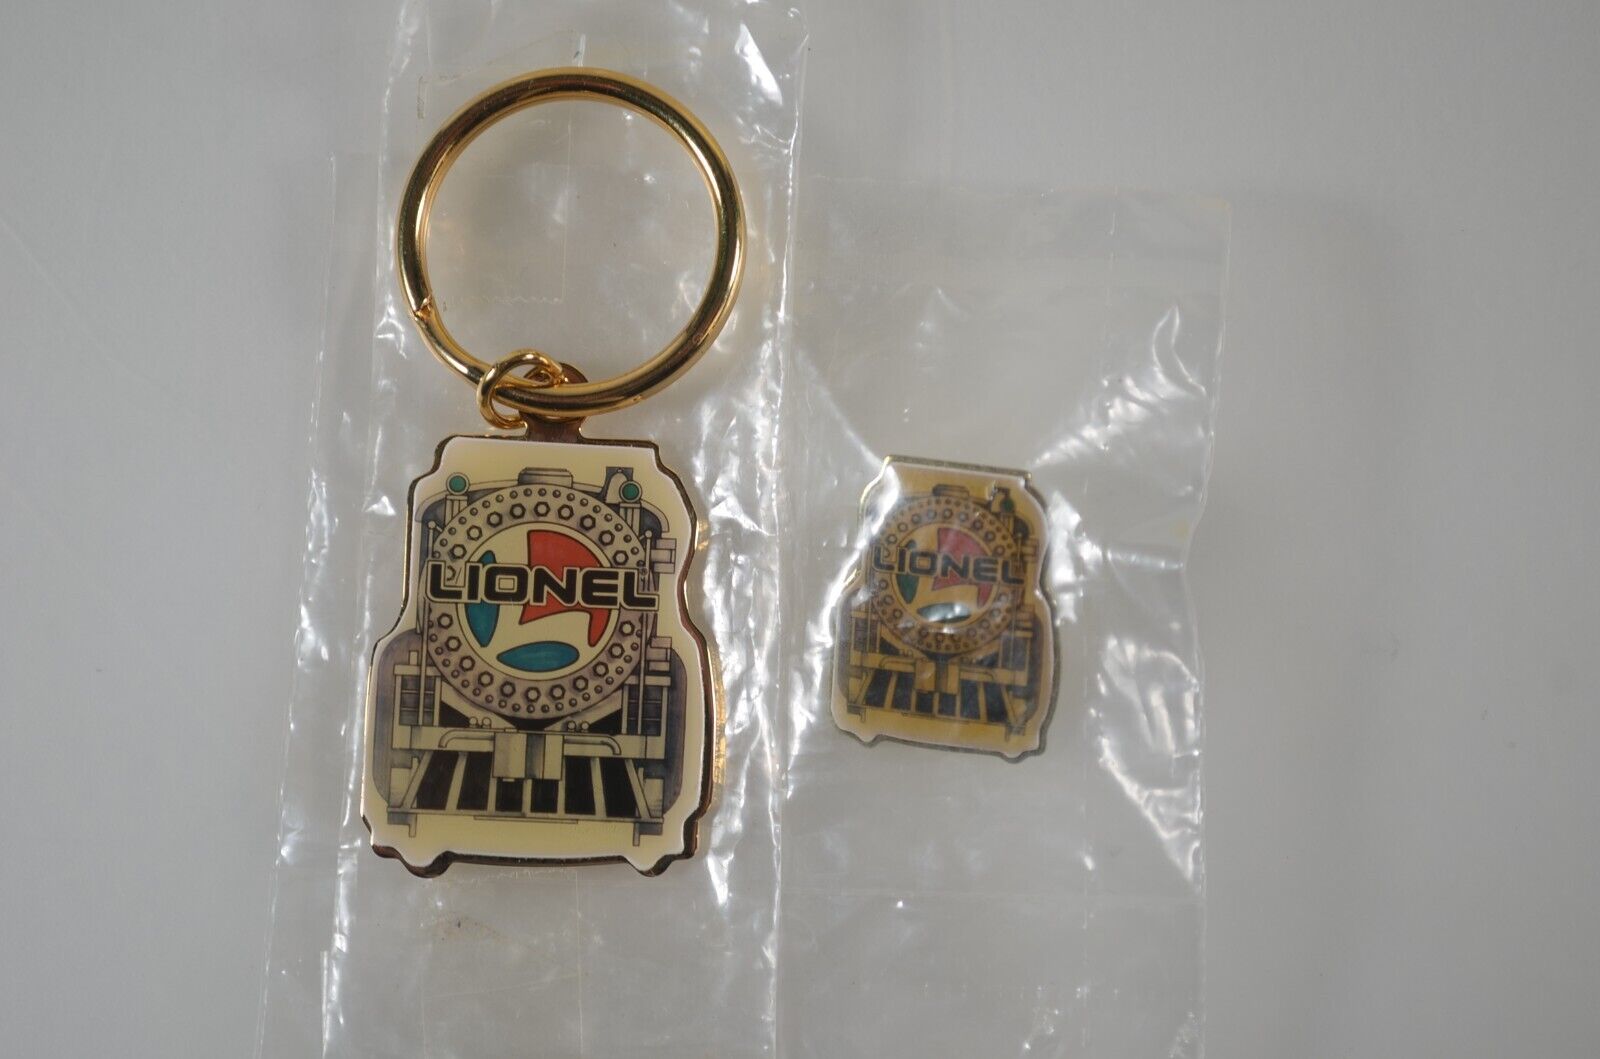 Lionel Trains Pin and Keychain Set